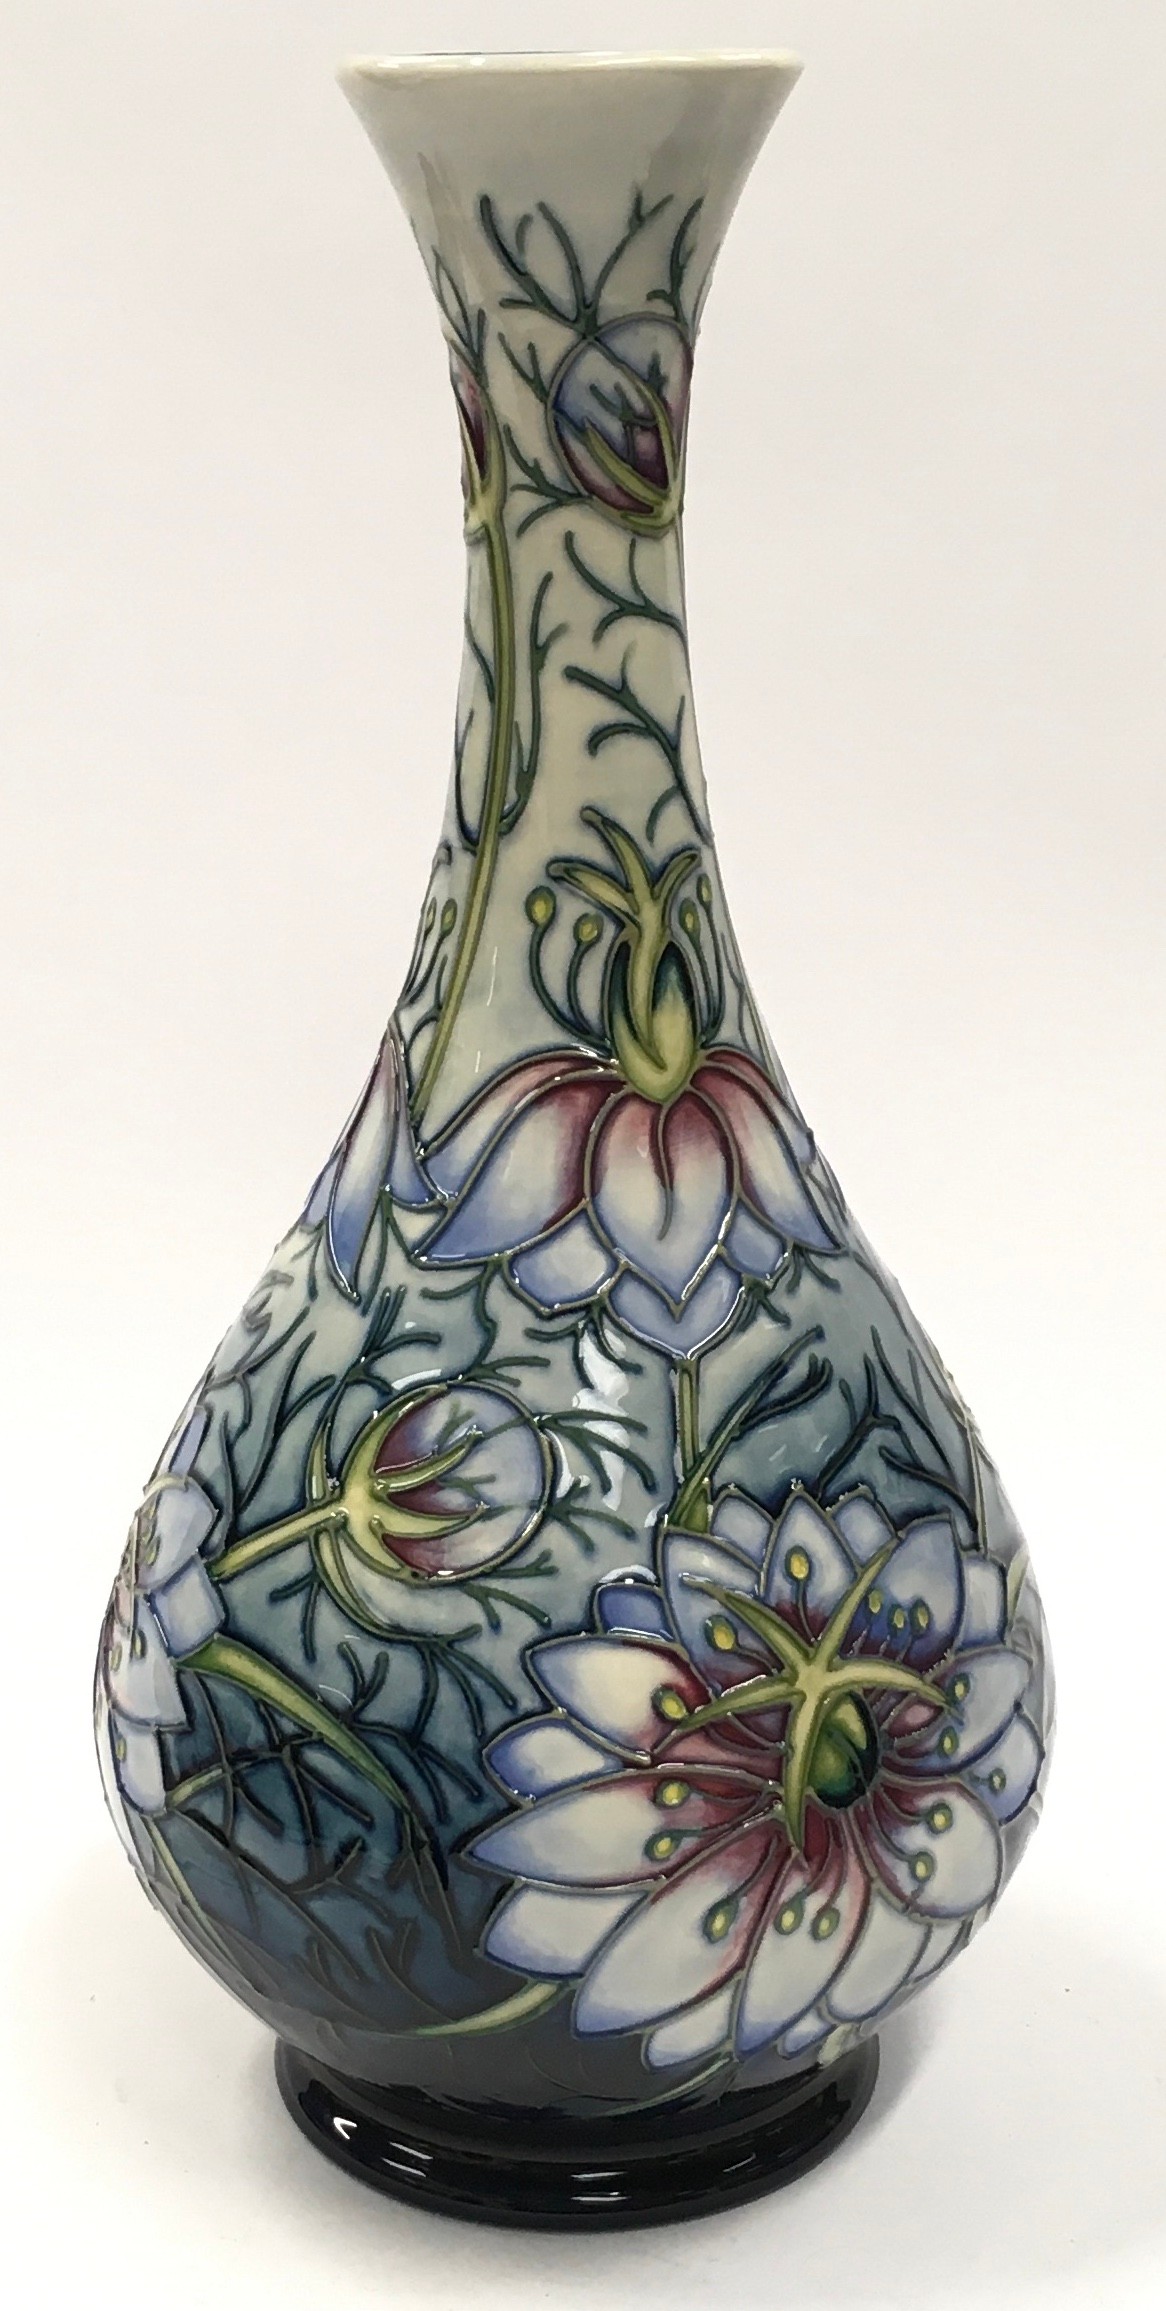 Moorcroft Rachel Bishop Love In The Mist vase 1995. Limited edition 290/300. 32cm tall. Signed and - Image 2 of 4